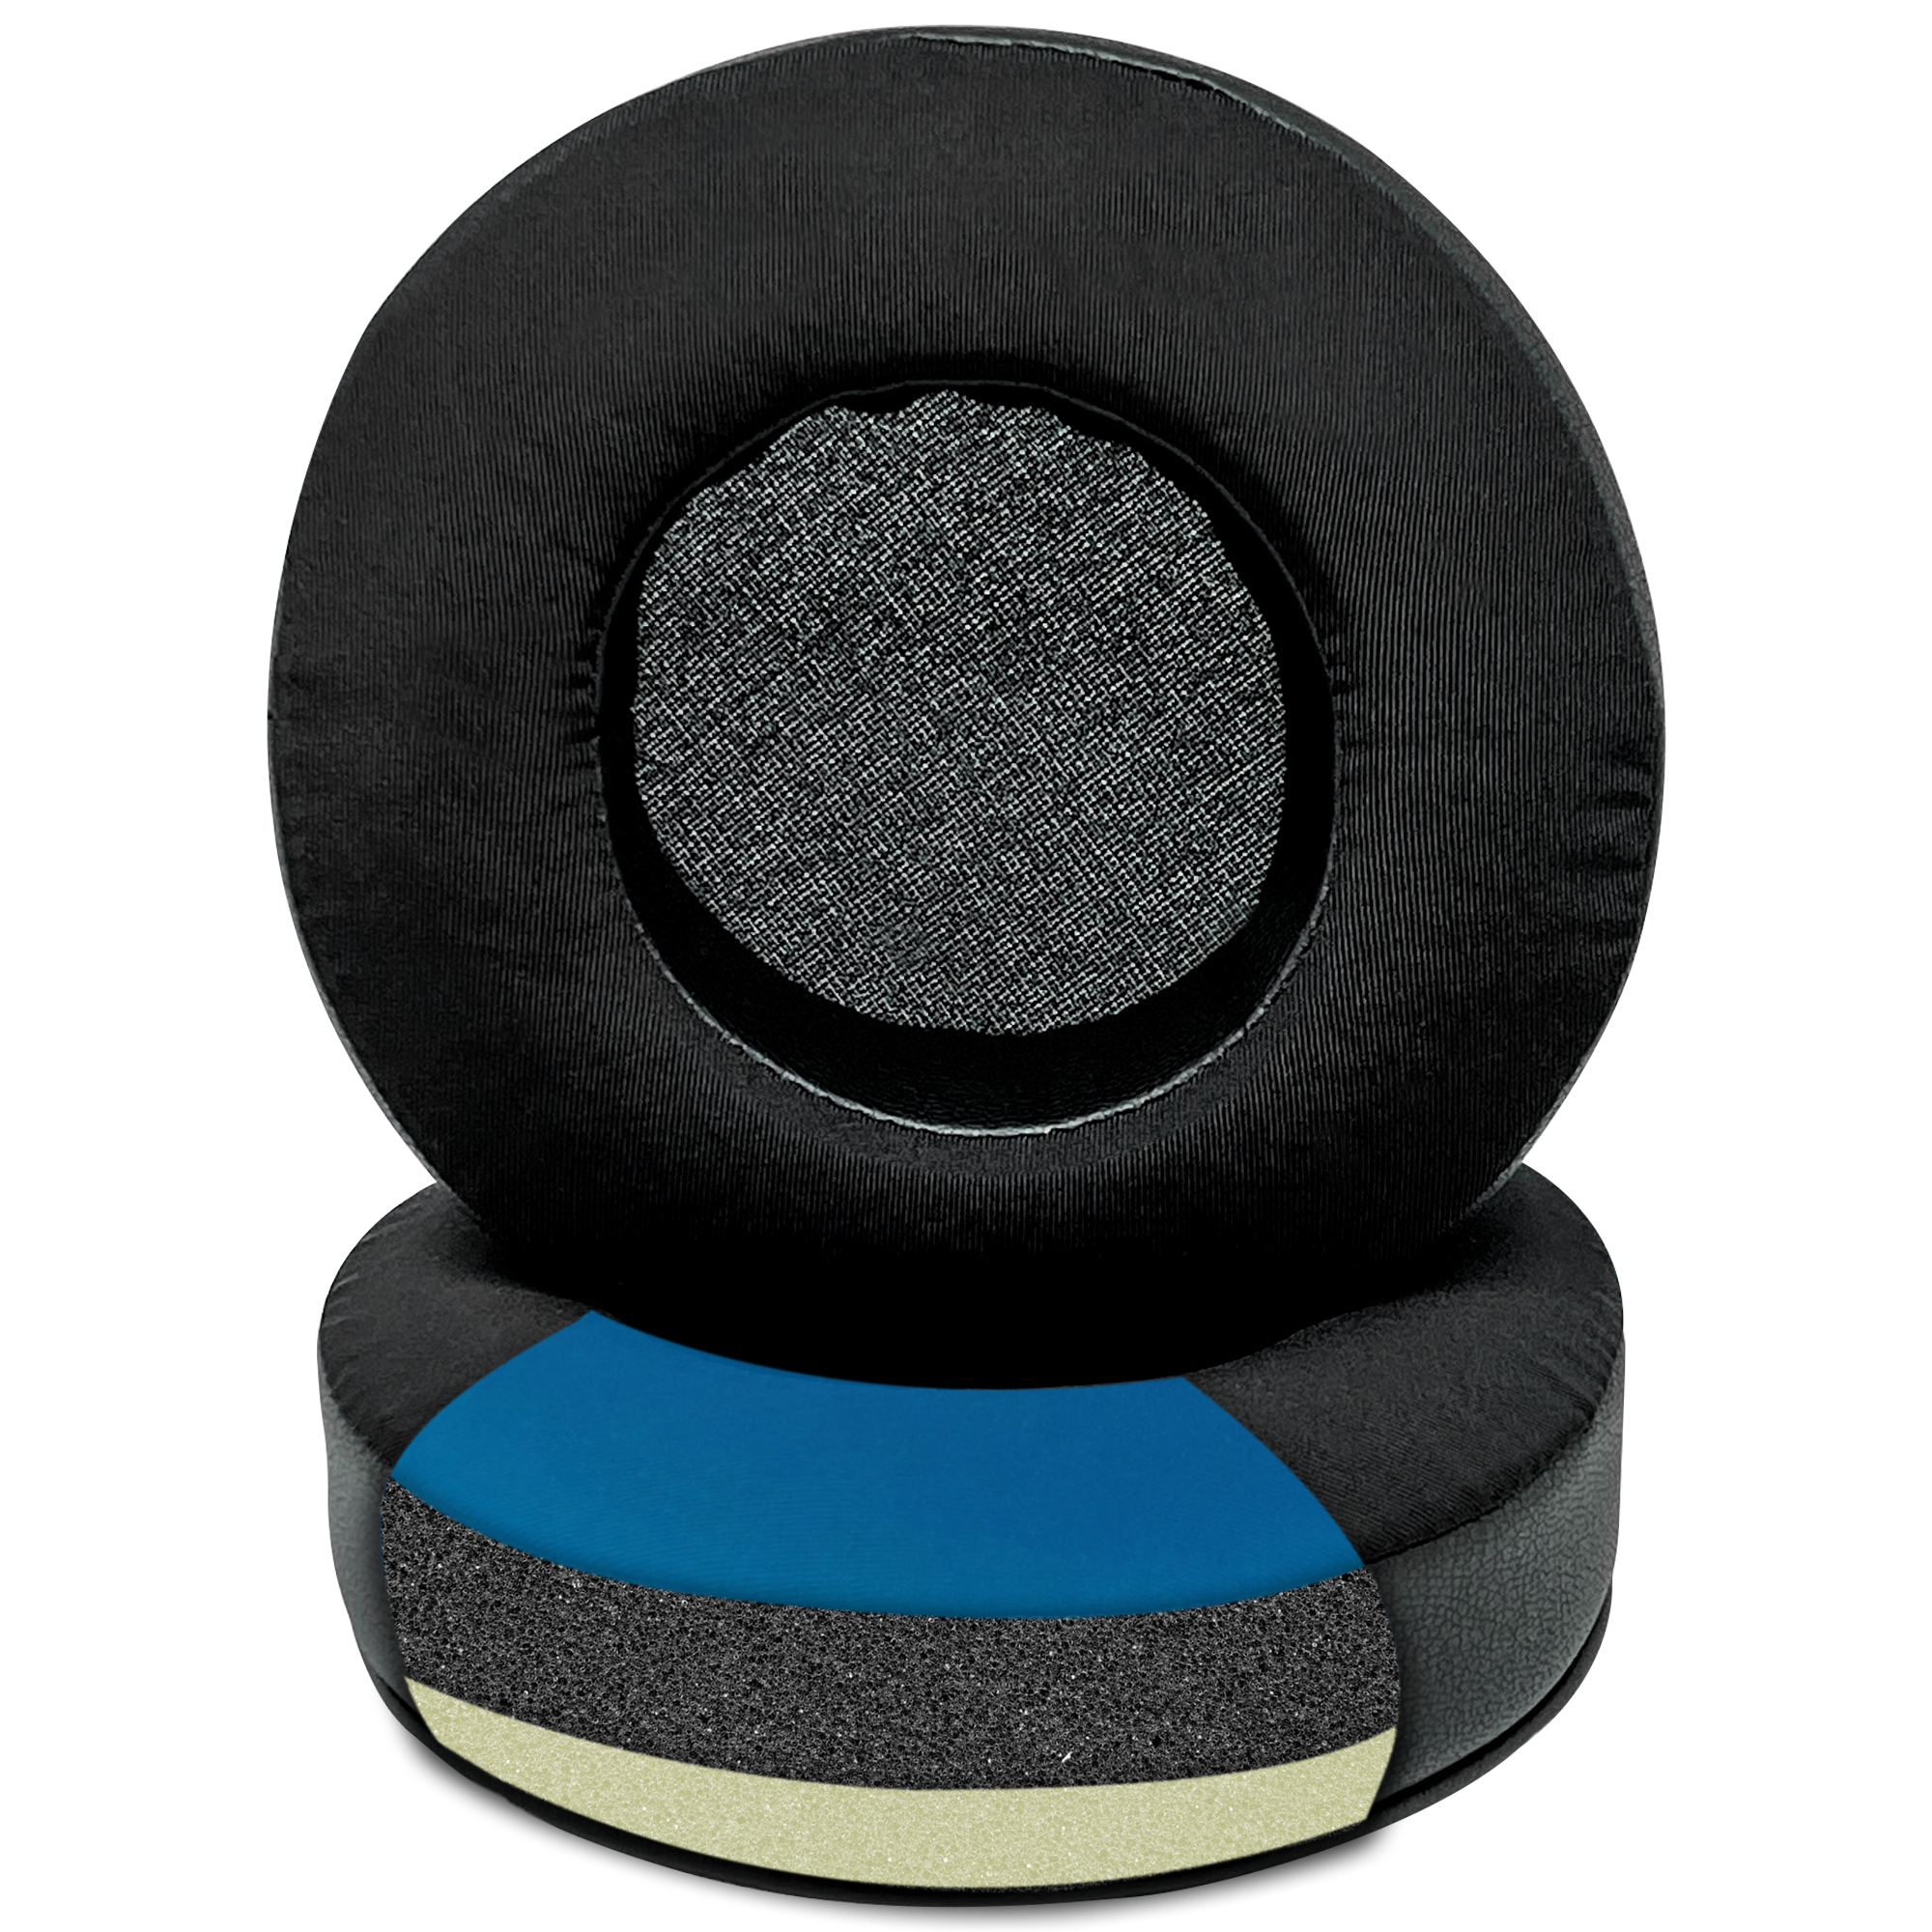 CentralSound Premium Cooling Gel + Memory Foam Replacement Ear Pad Cushions Universal Round 100mm